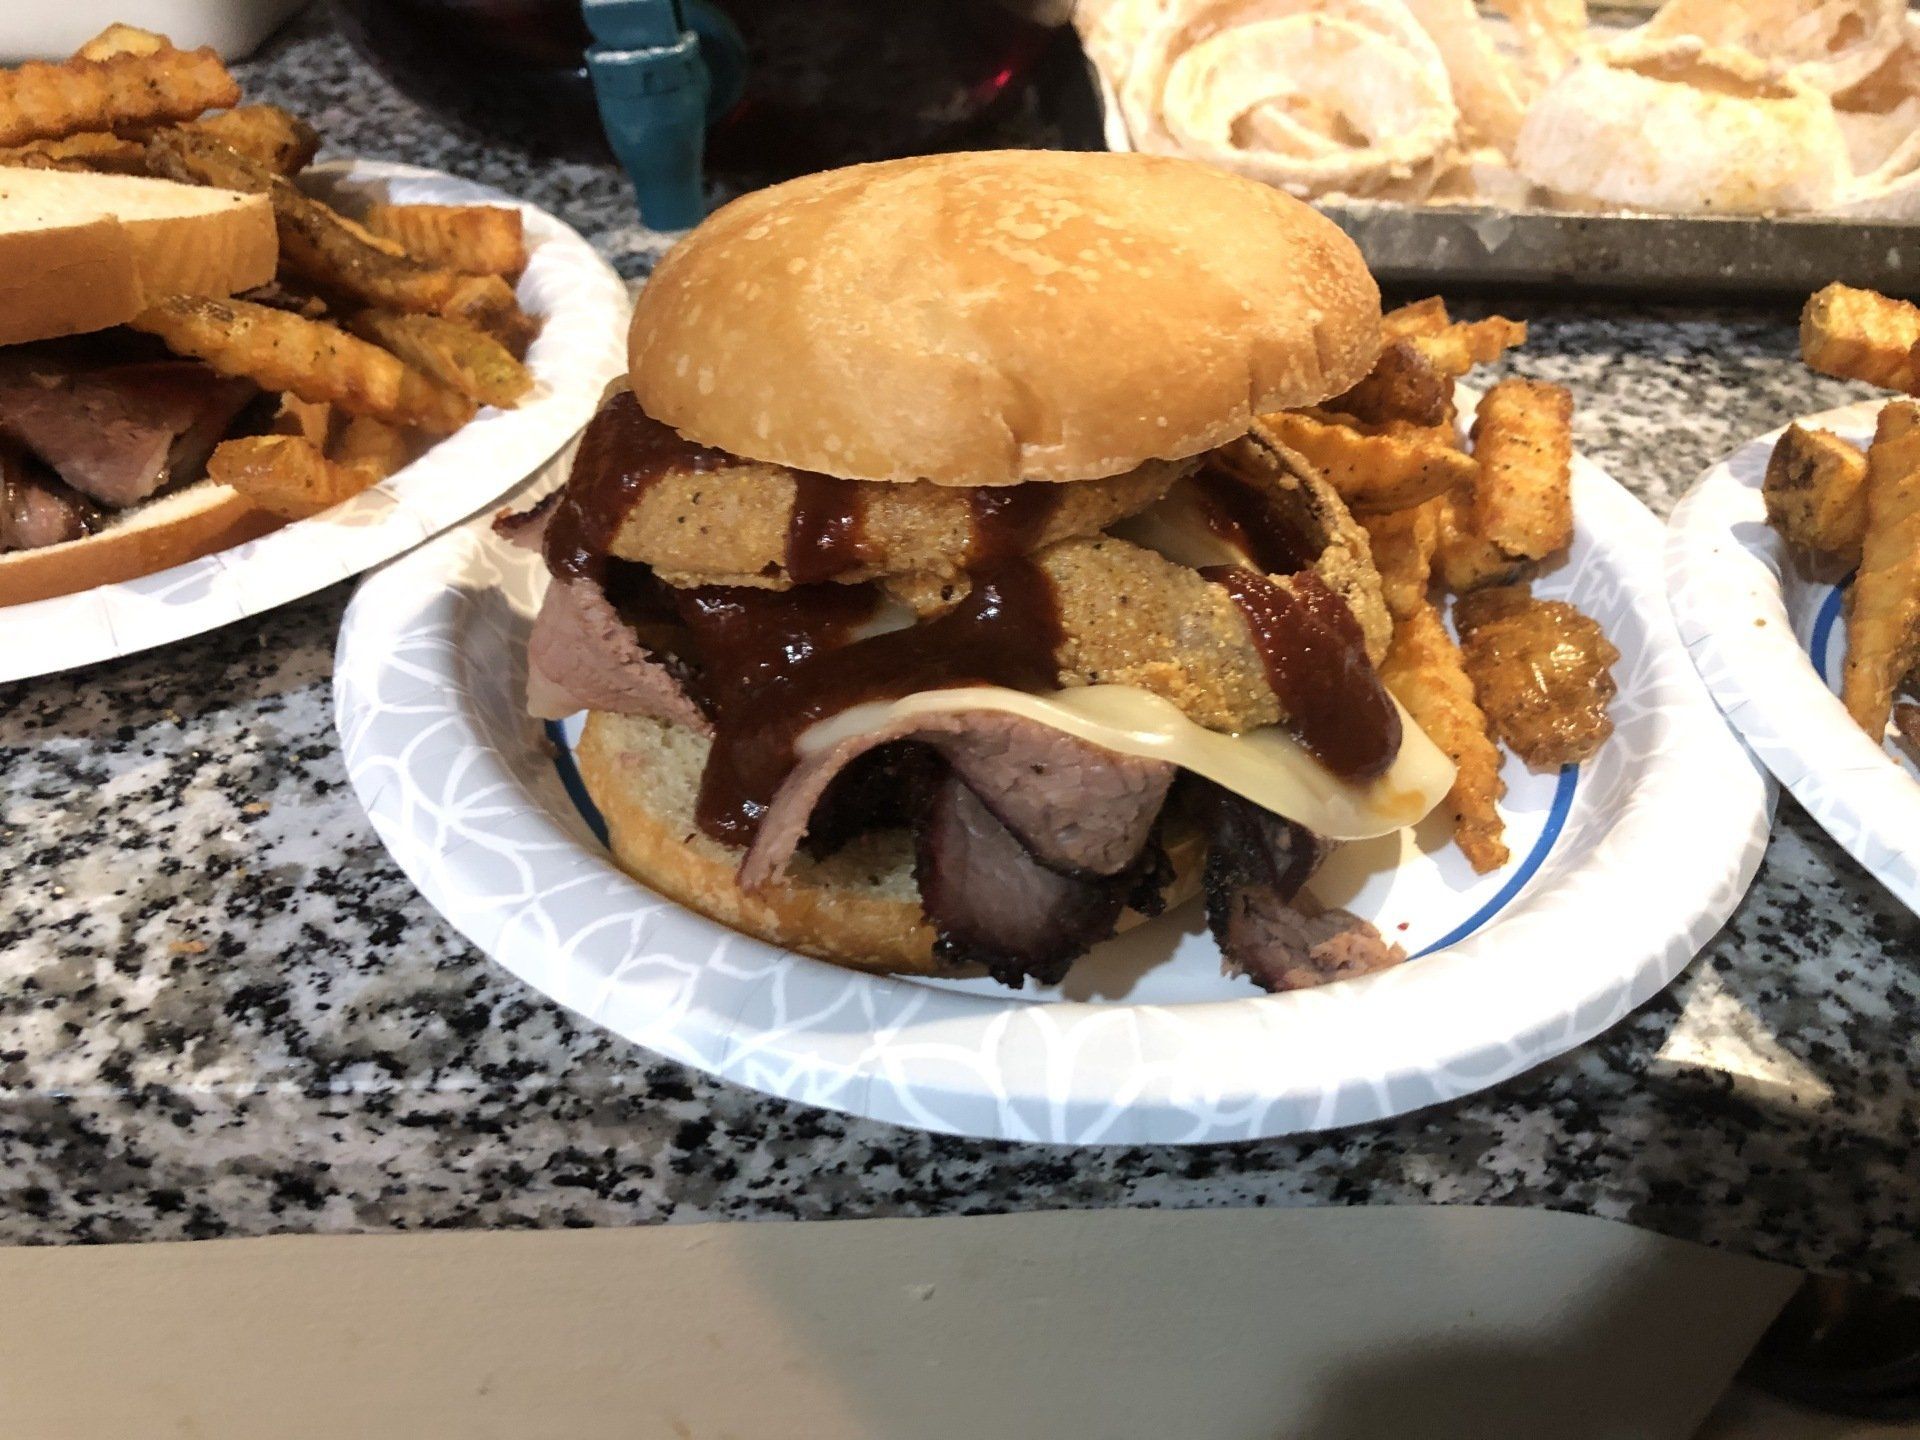 Z-man sandwich with brisket and sauce on a white paper plate